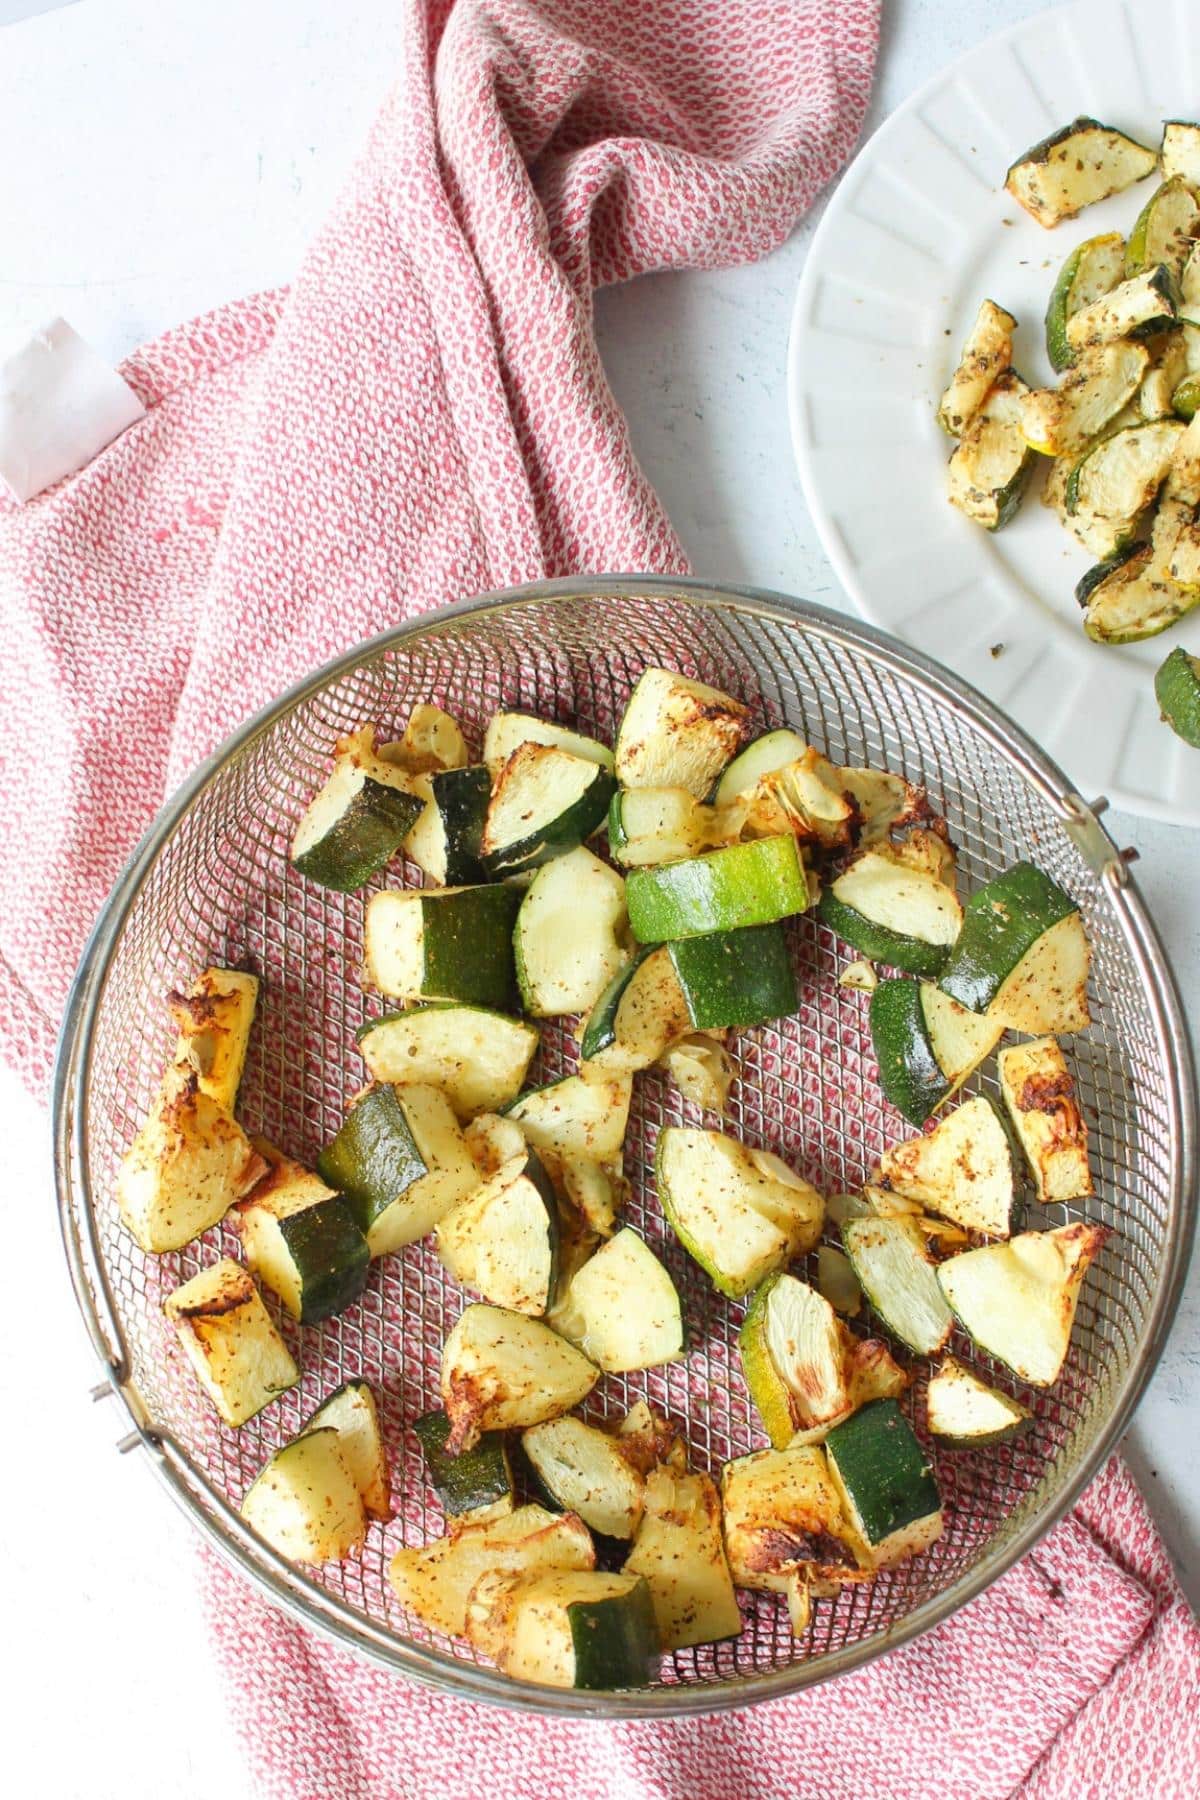 Zucchini cooked in an airfryer